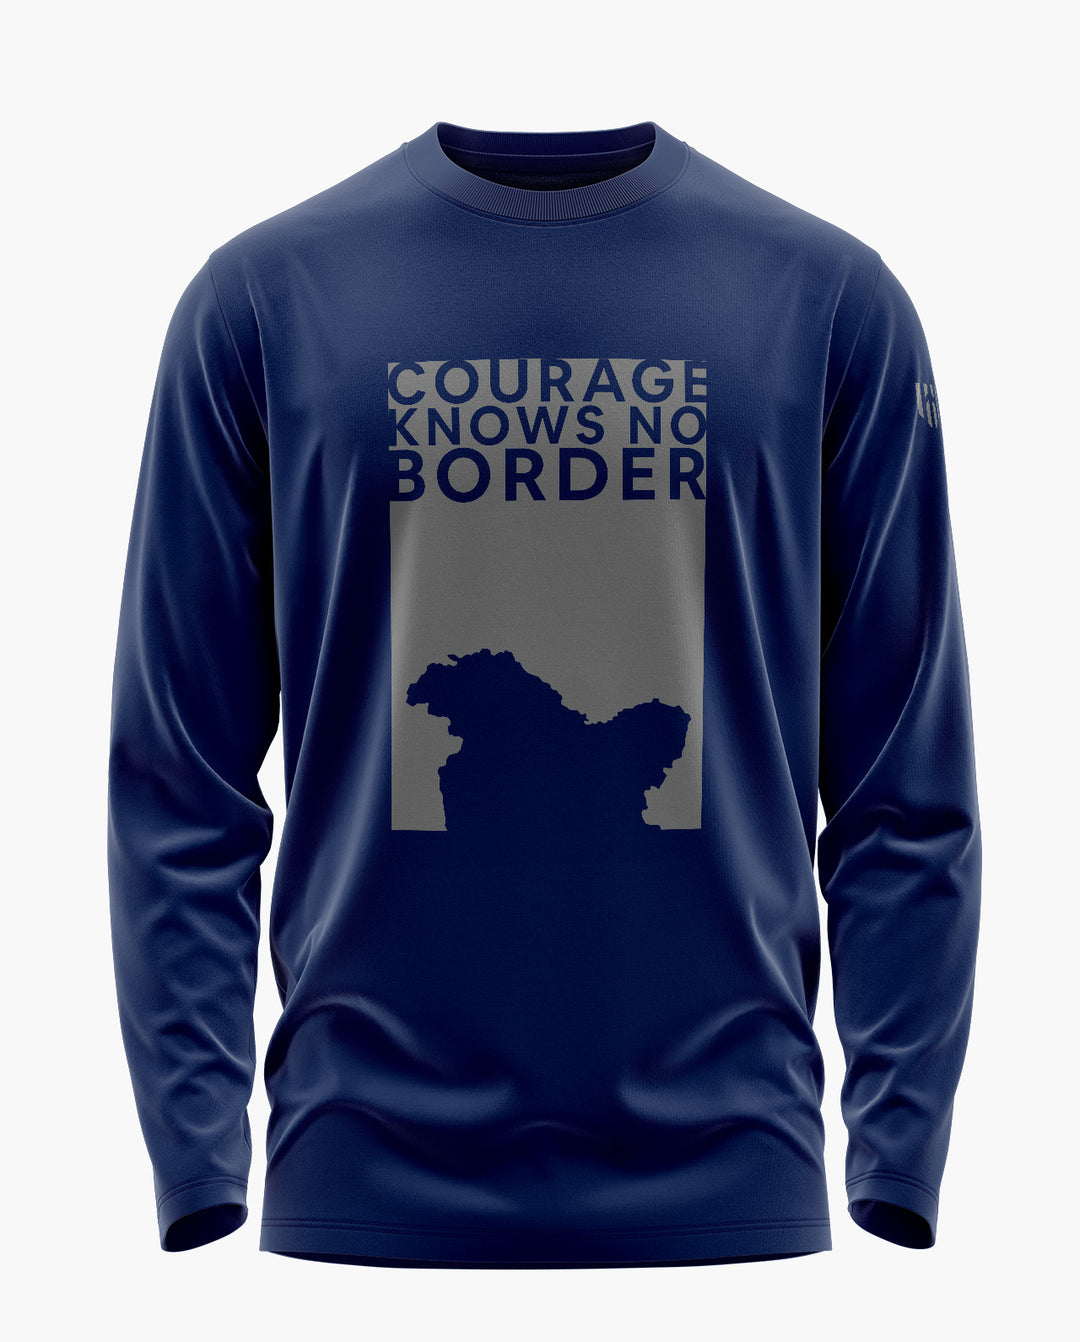 Courage knows no border Full Sleeve T-Shirt